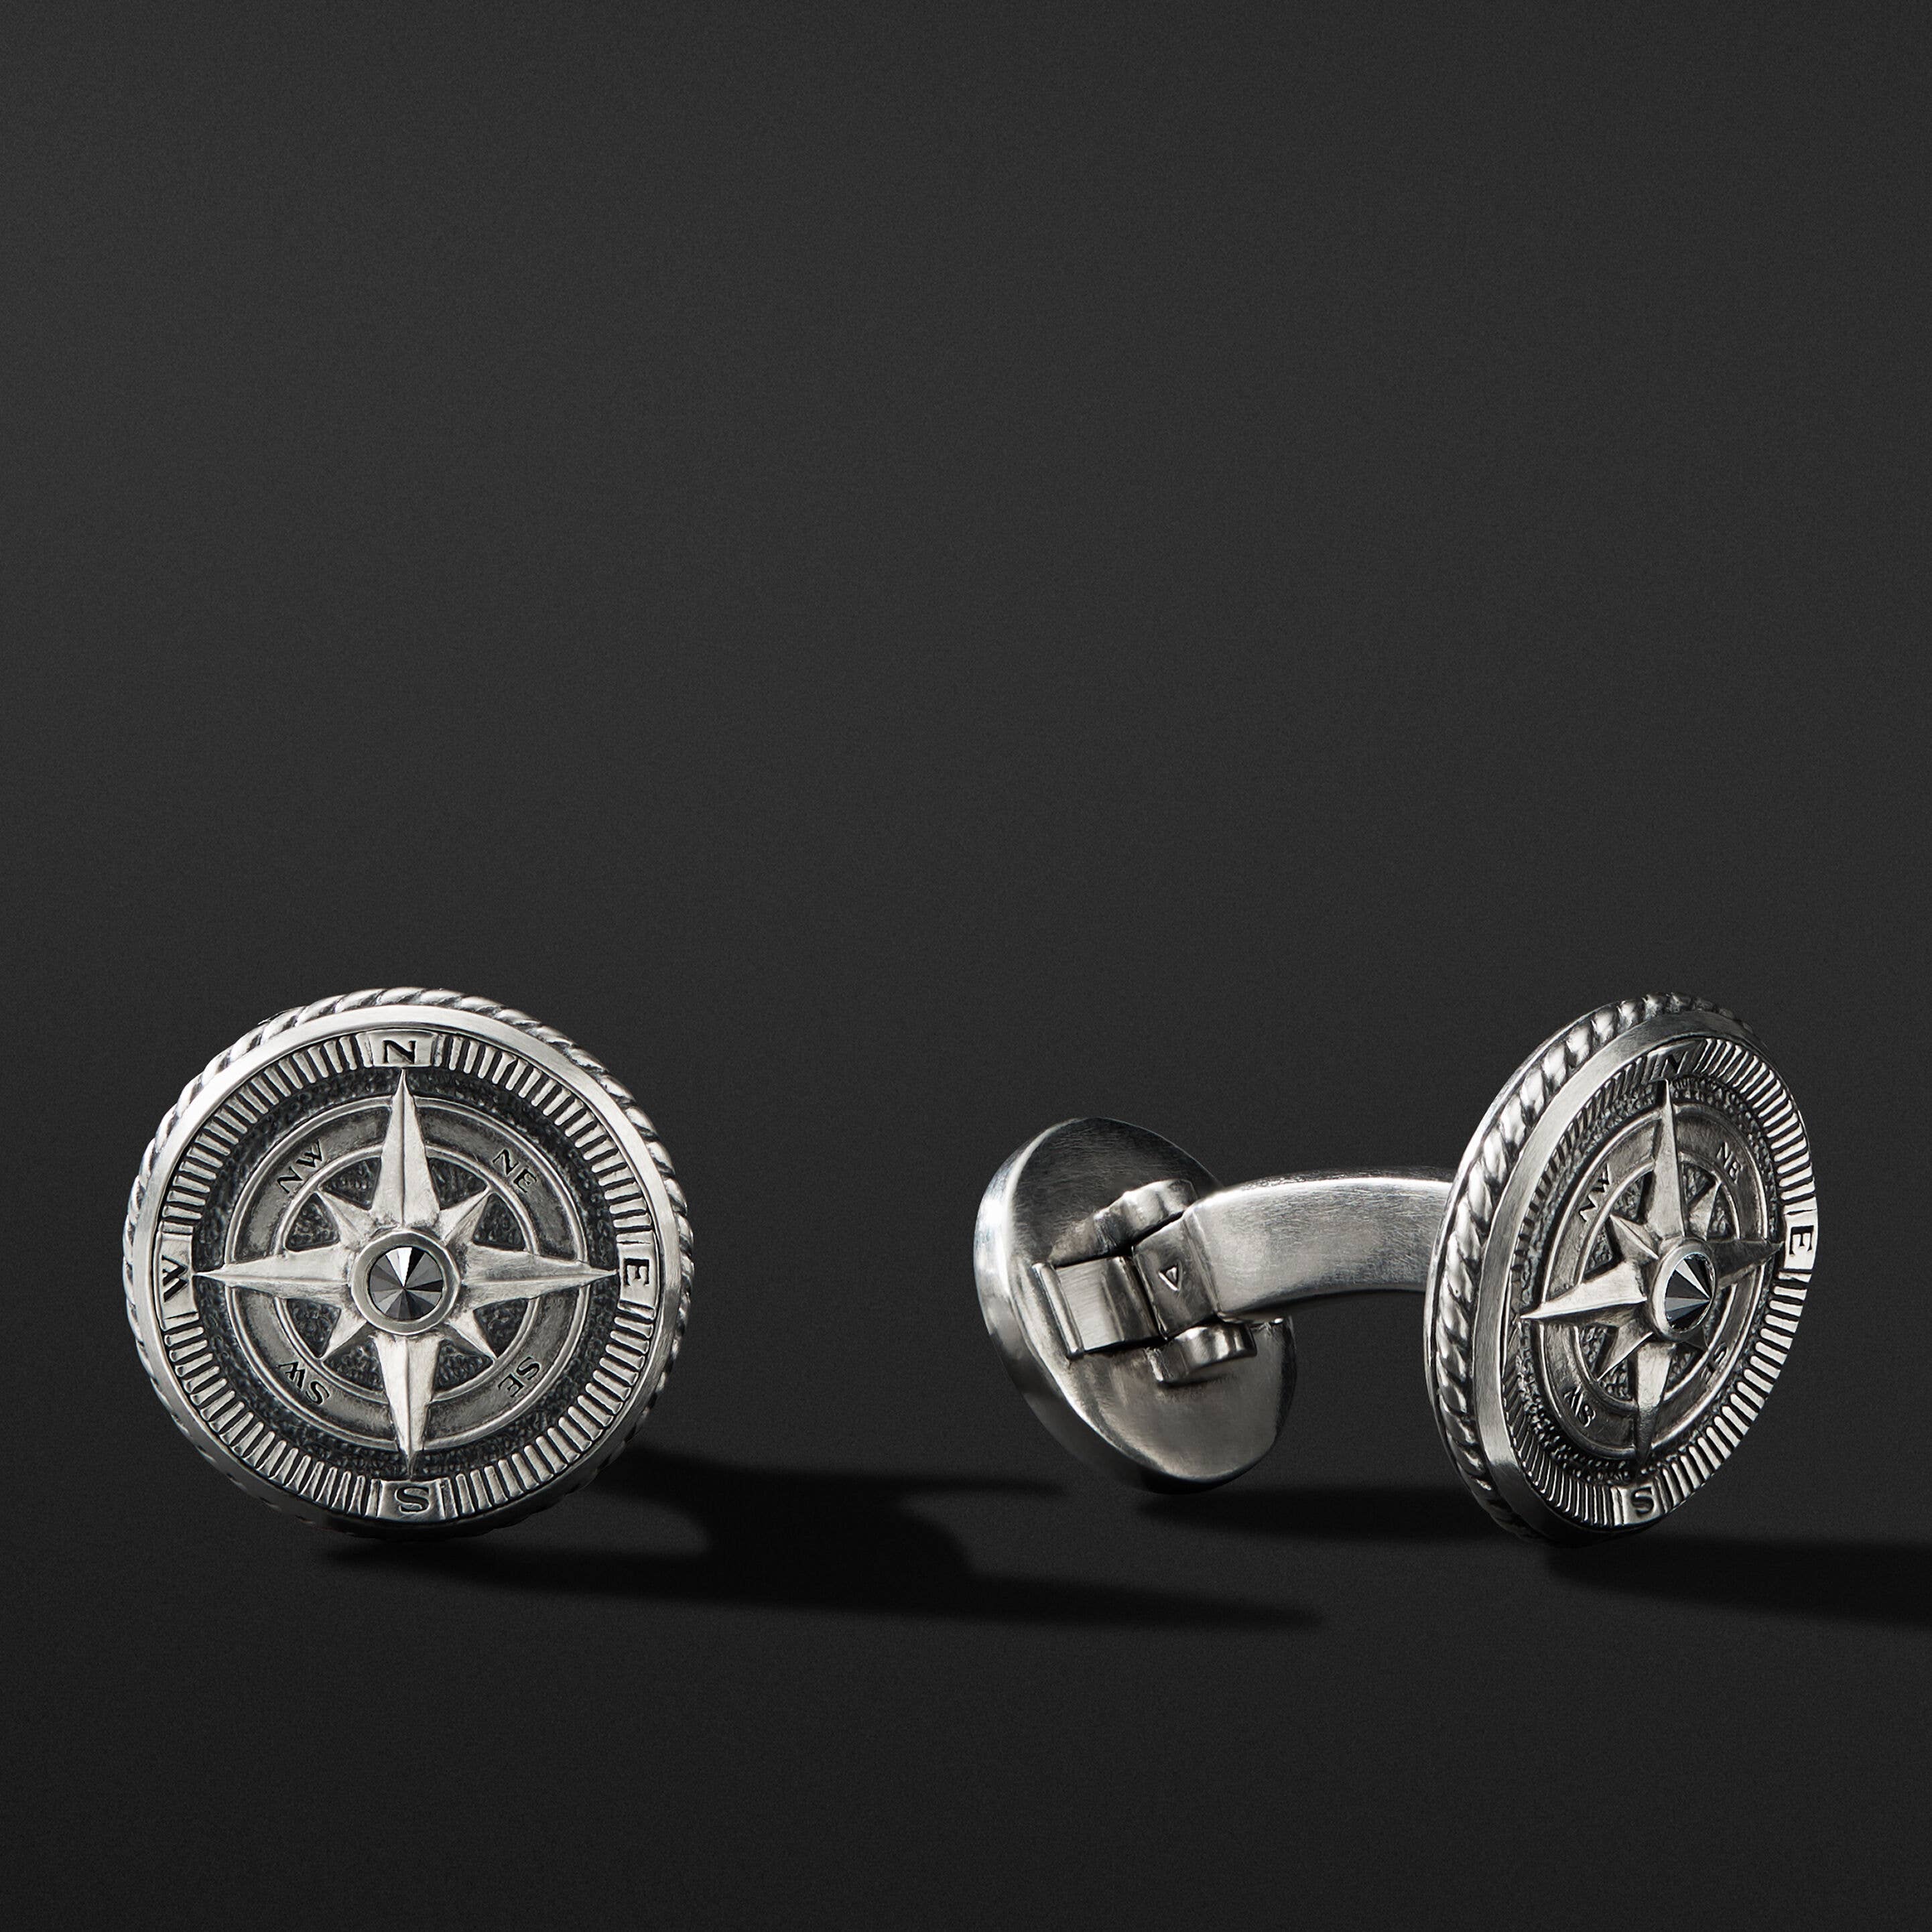 Maritime® Compass Cufflinks in Sterling Silver with Center Black Diamond